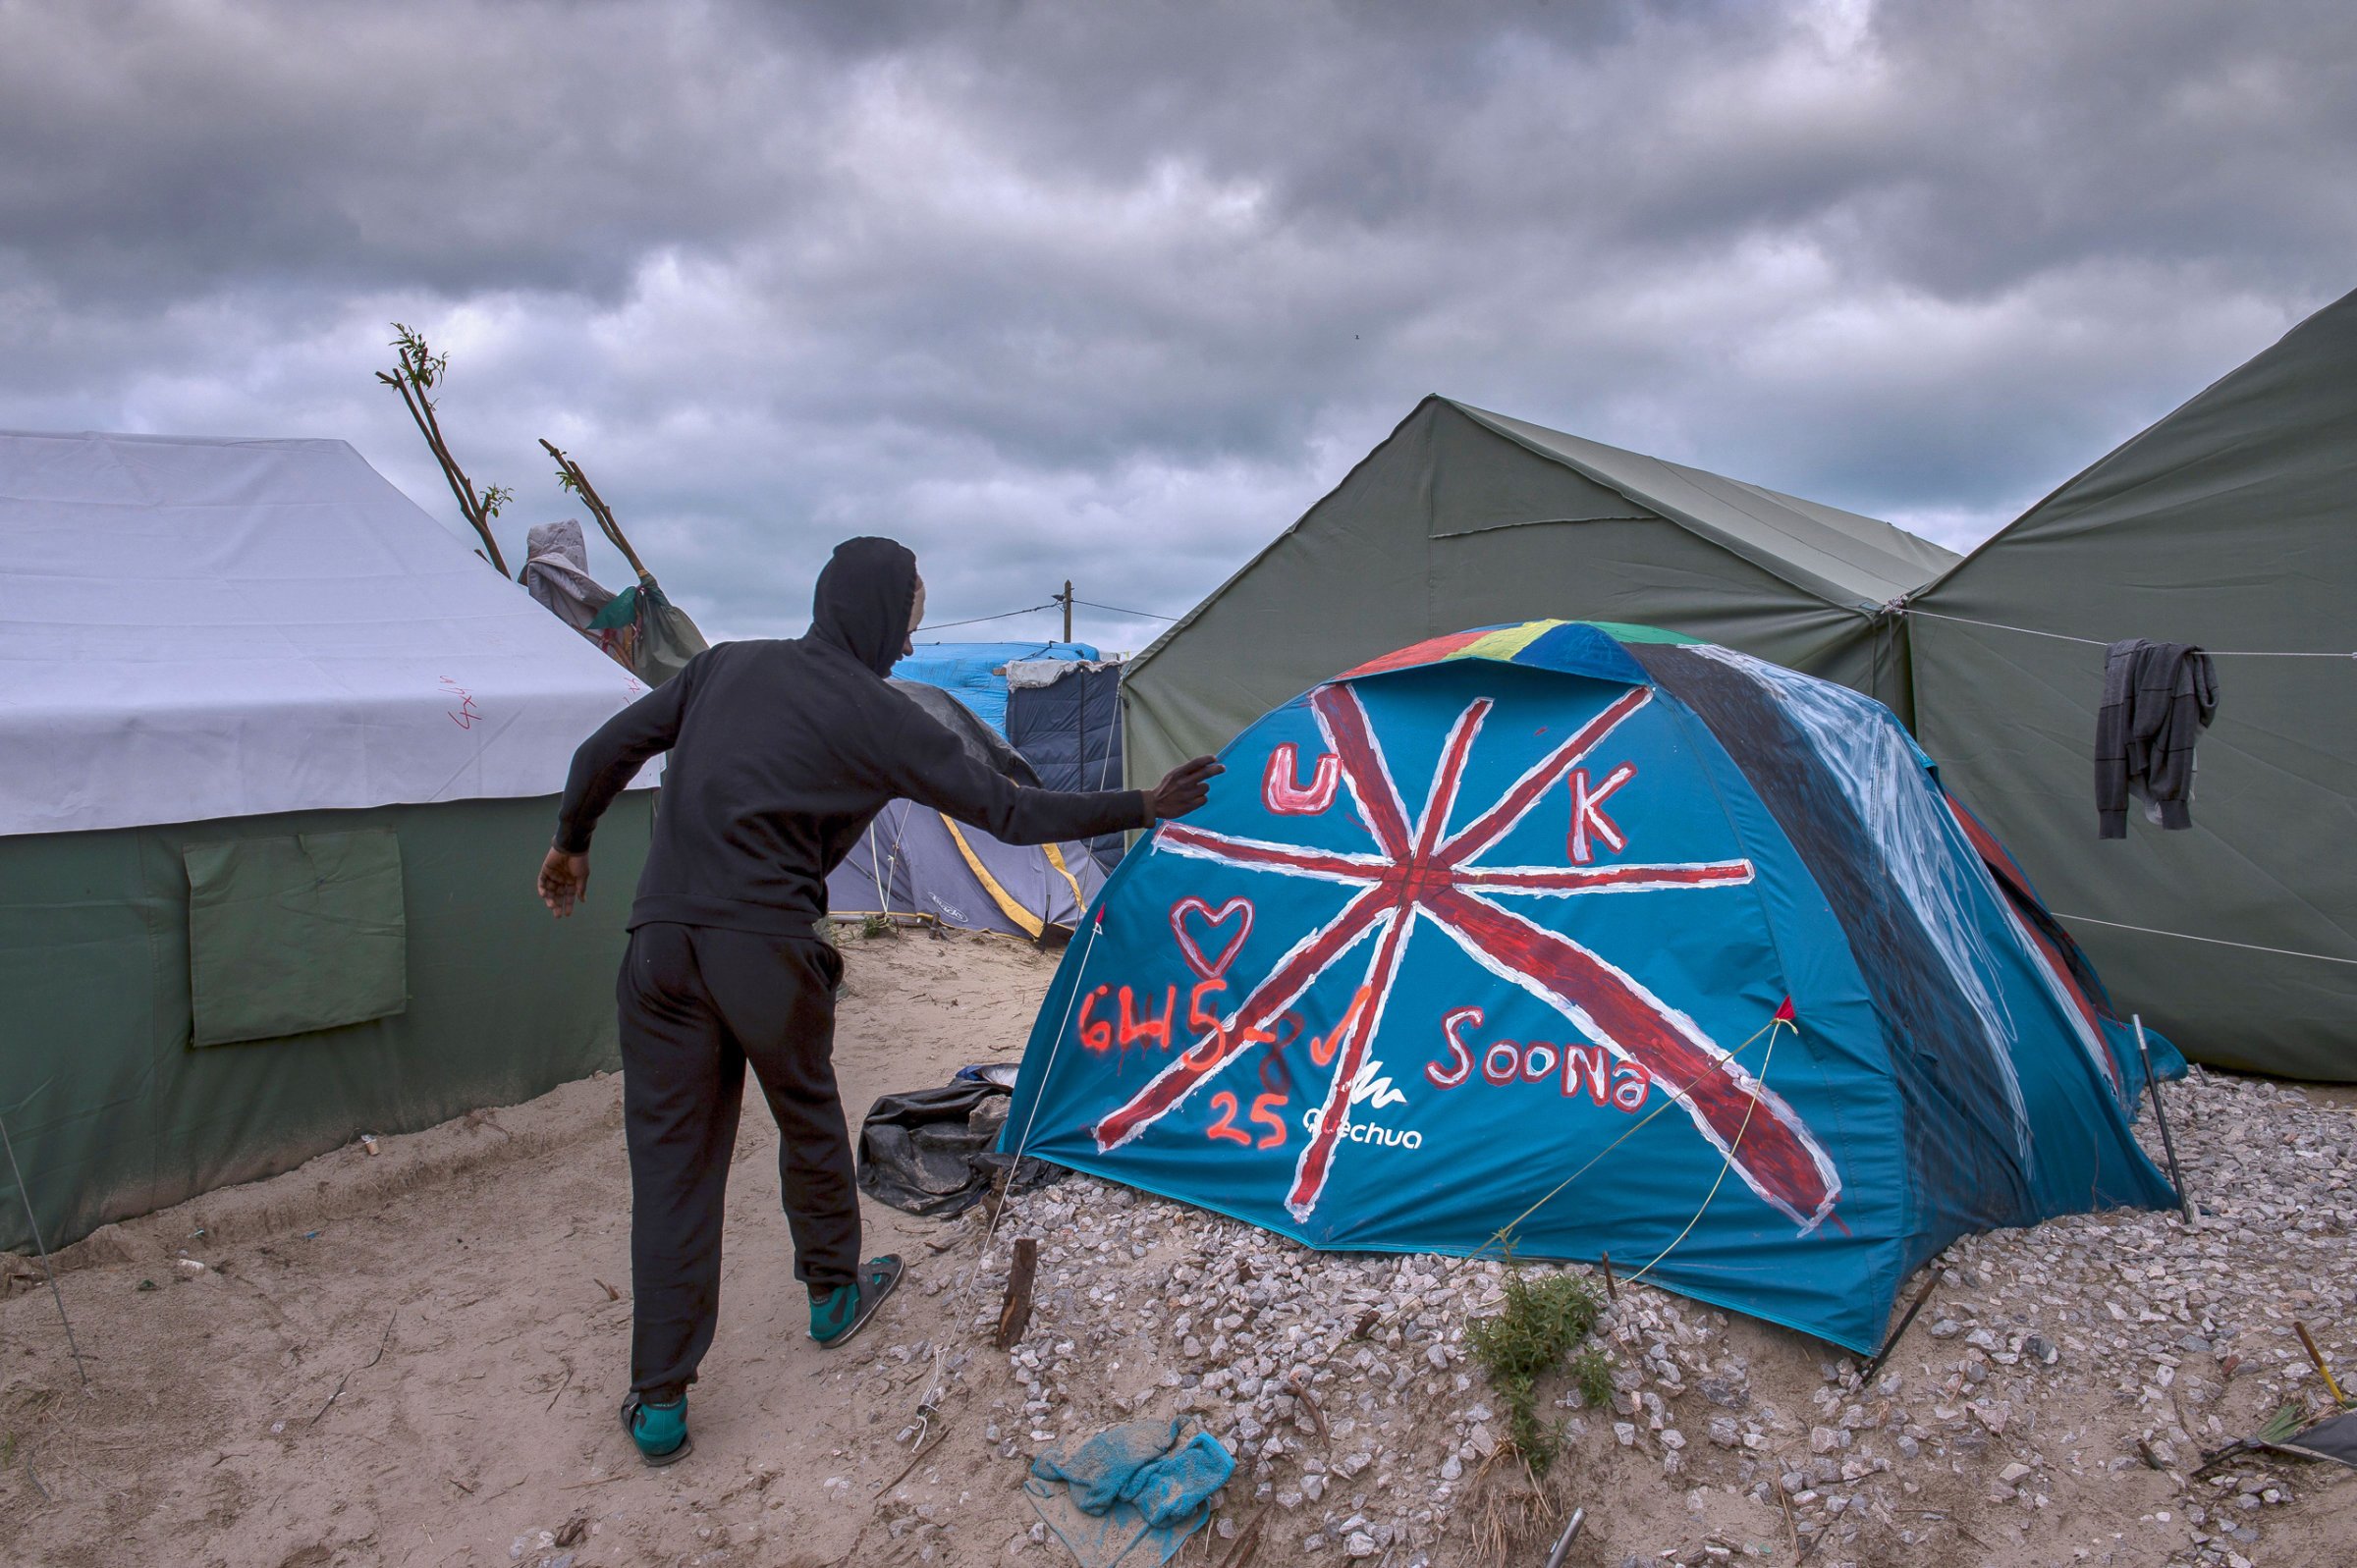 A Sudanese man stands near a tent painted with the British flag at the "Jungle" migrant camp in Calais on Oct. 12, 2016.